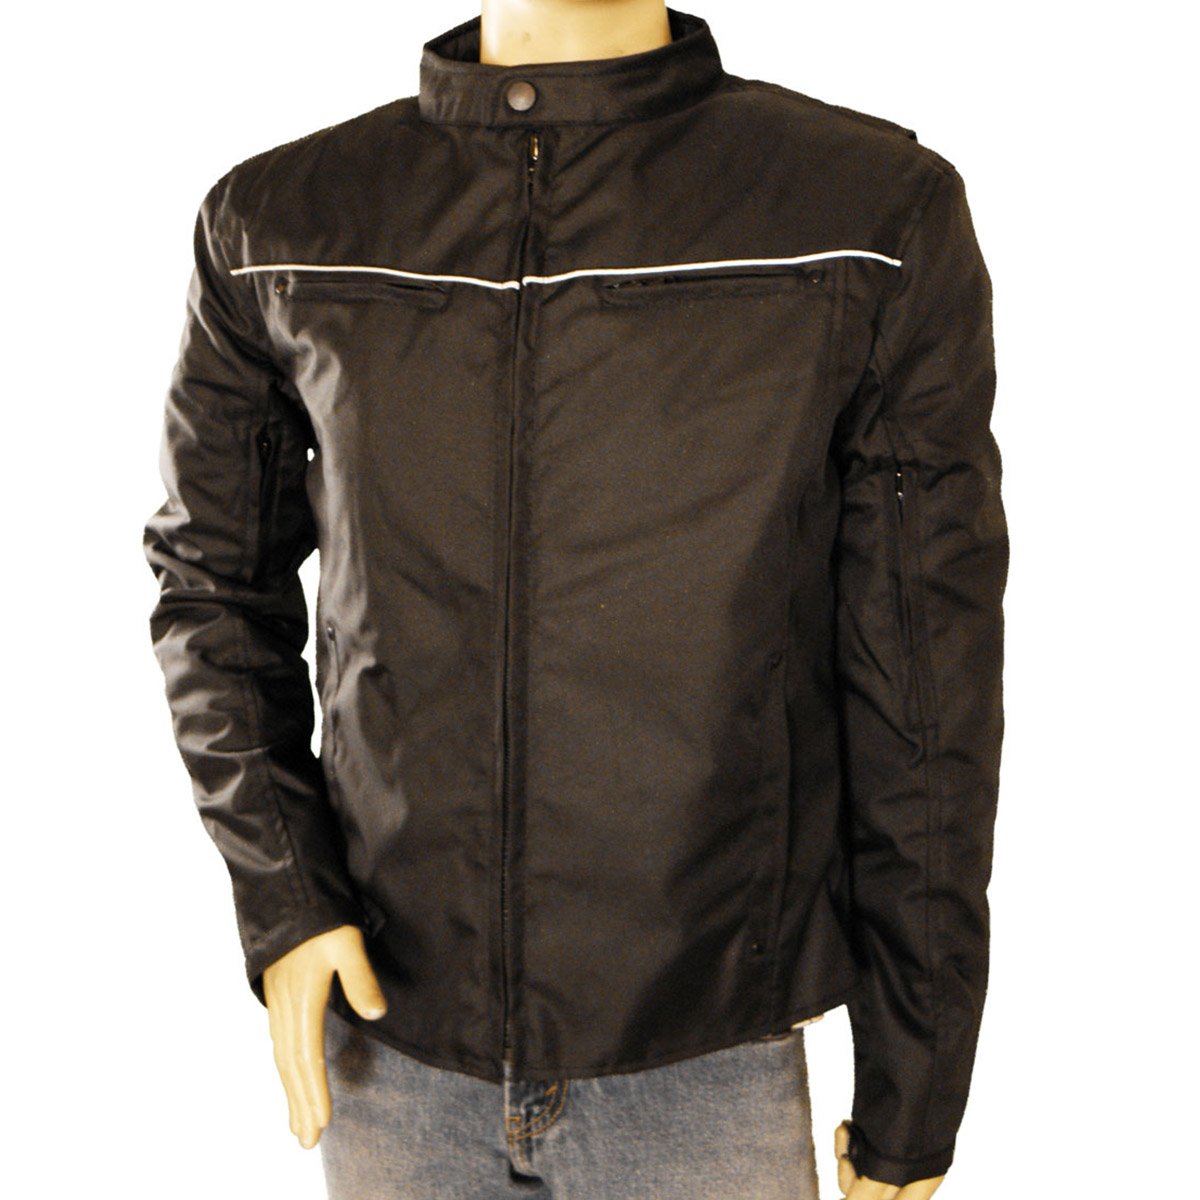 Vance Leather Men's Vented Textile Jacket with Reflective Piping